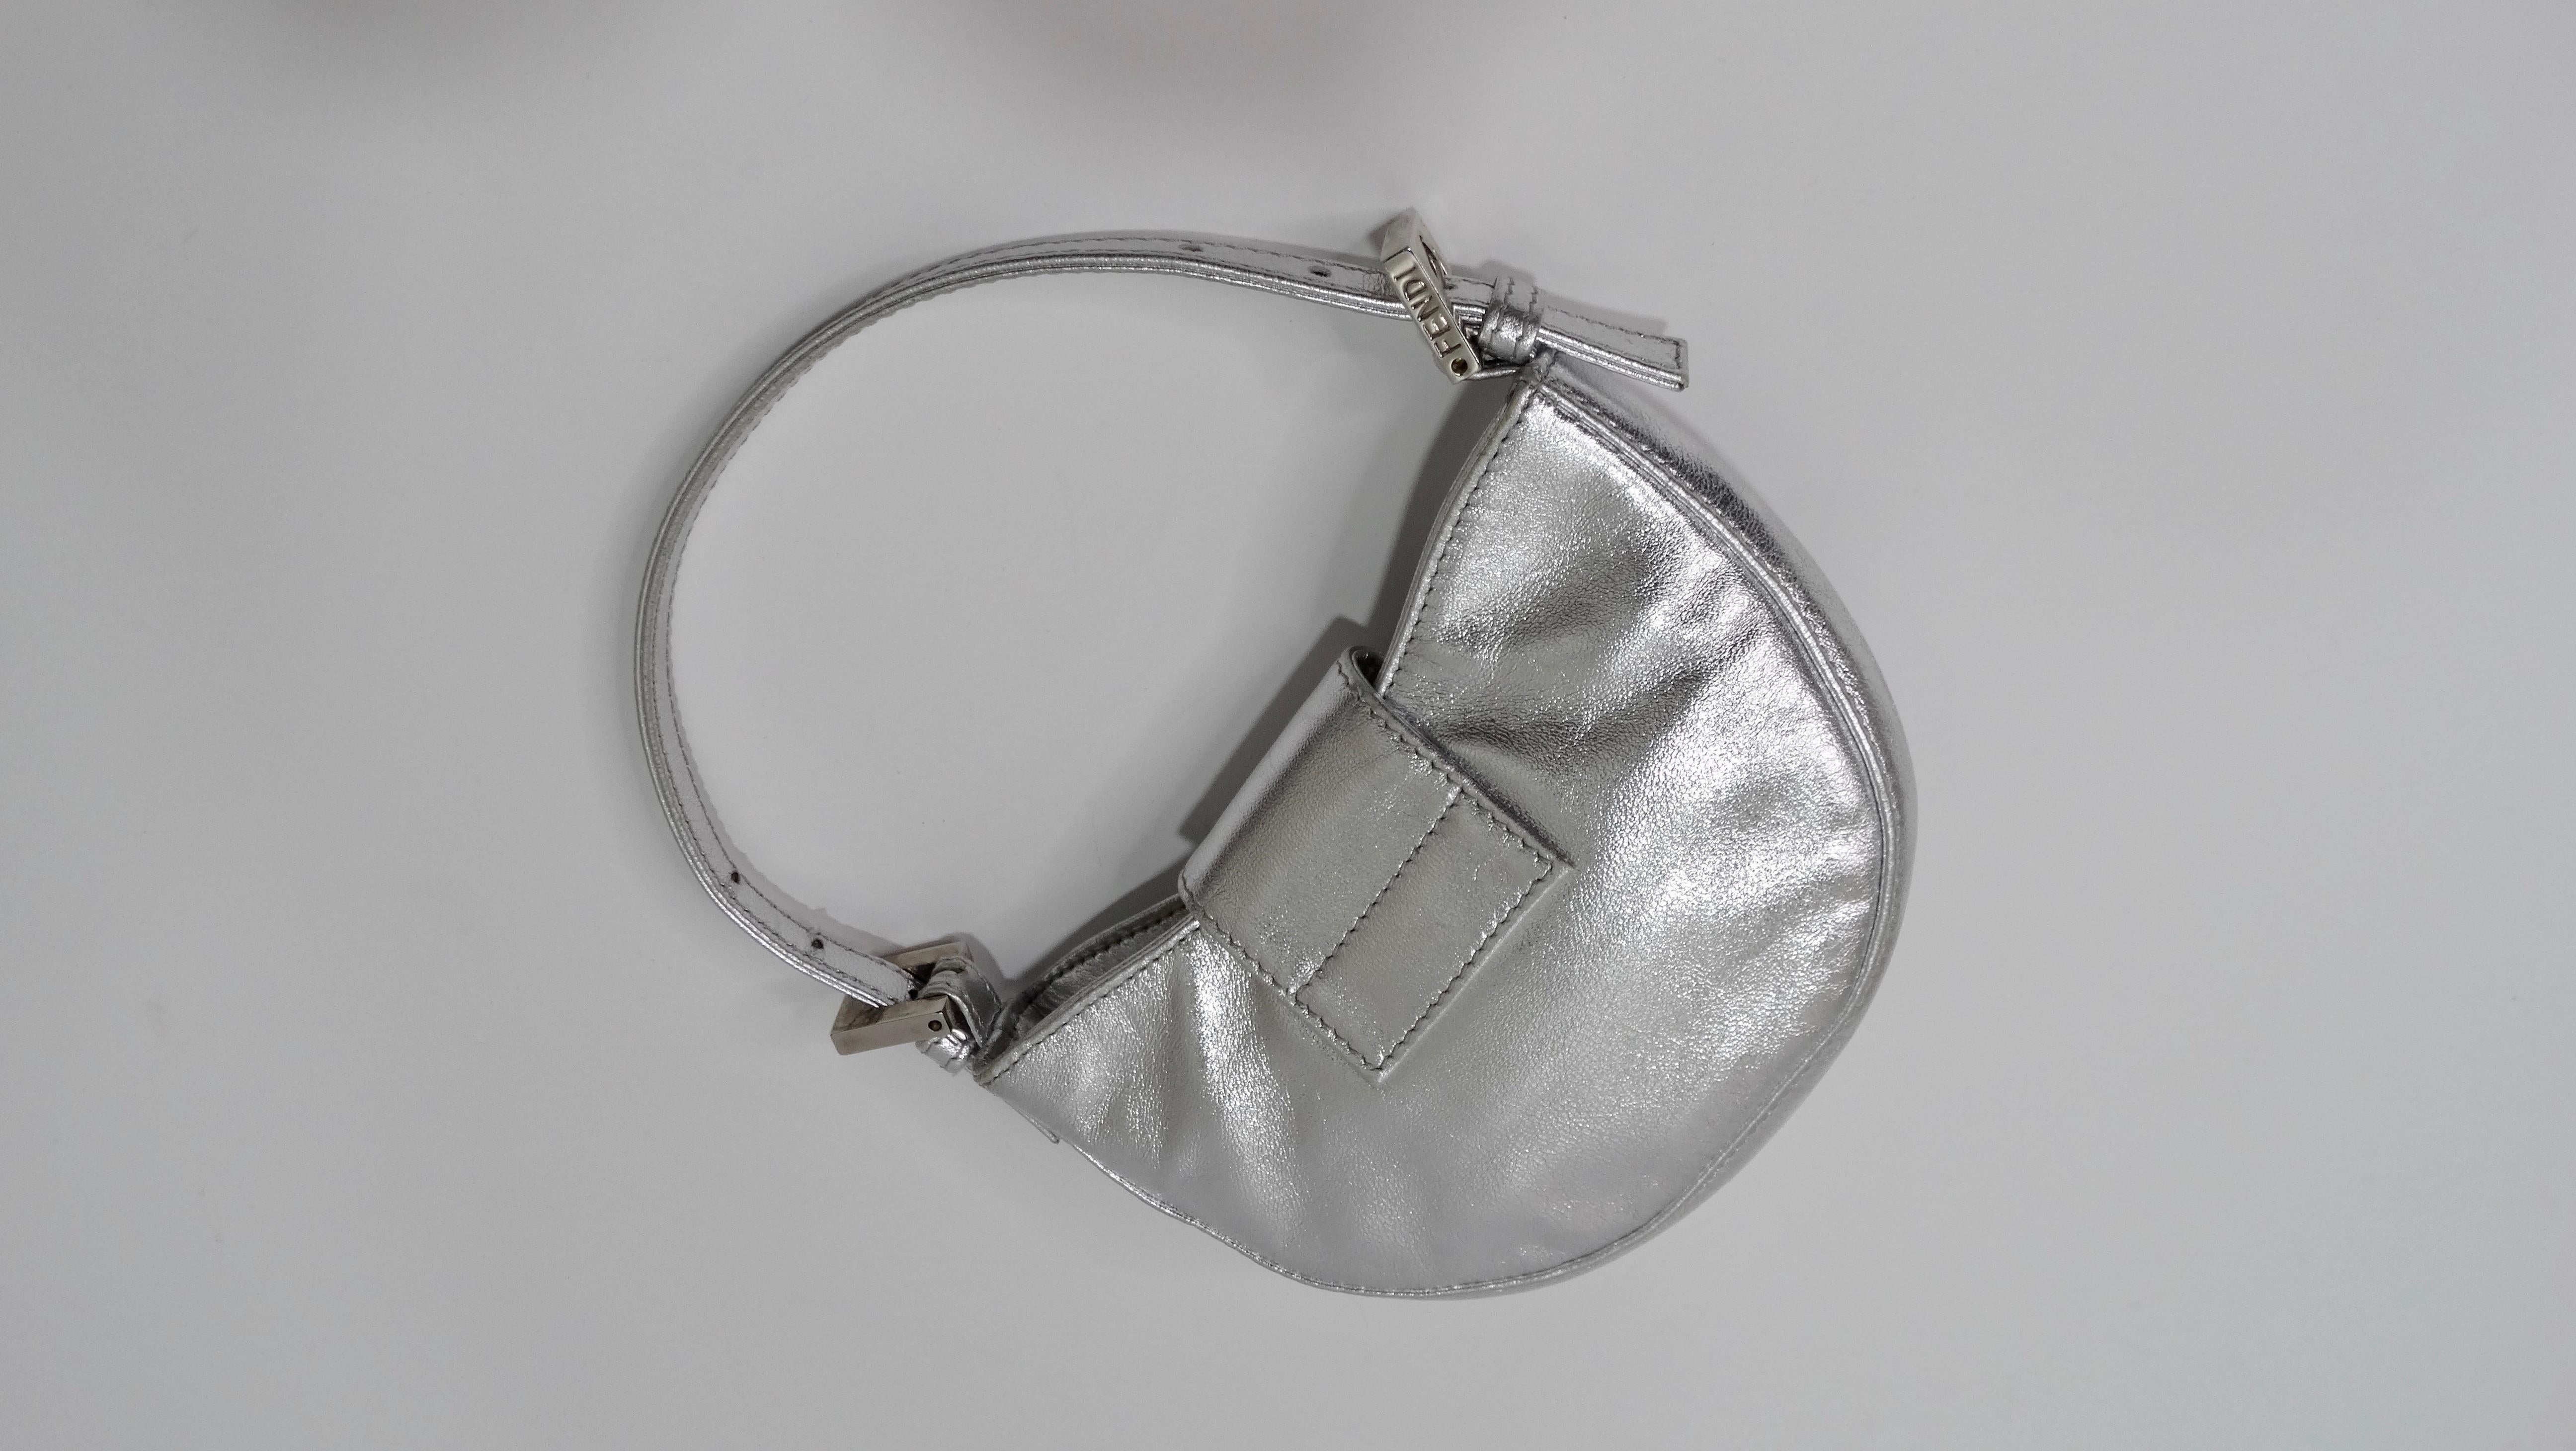 The most adorable fashion statement is about to be made with this Fendi! Circa late 1990s/early 2000s, this mini bag dubbed the 'croissant' is crafted from silver metallic leather and features a single adjustable top handle, silver hardware, and the